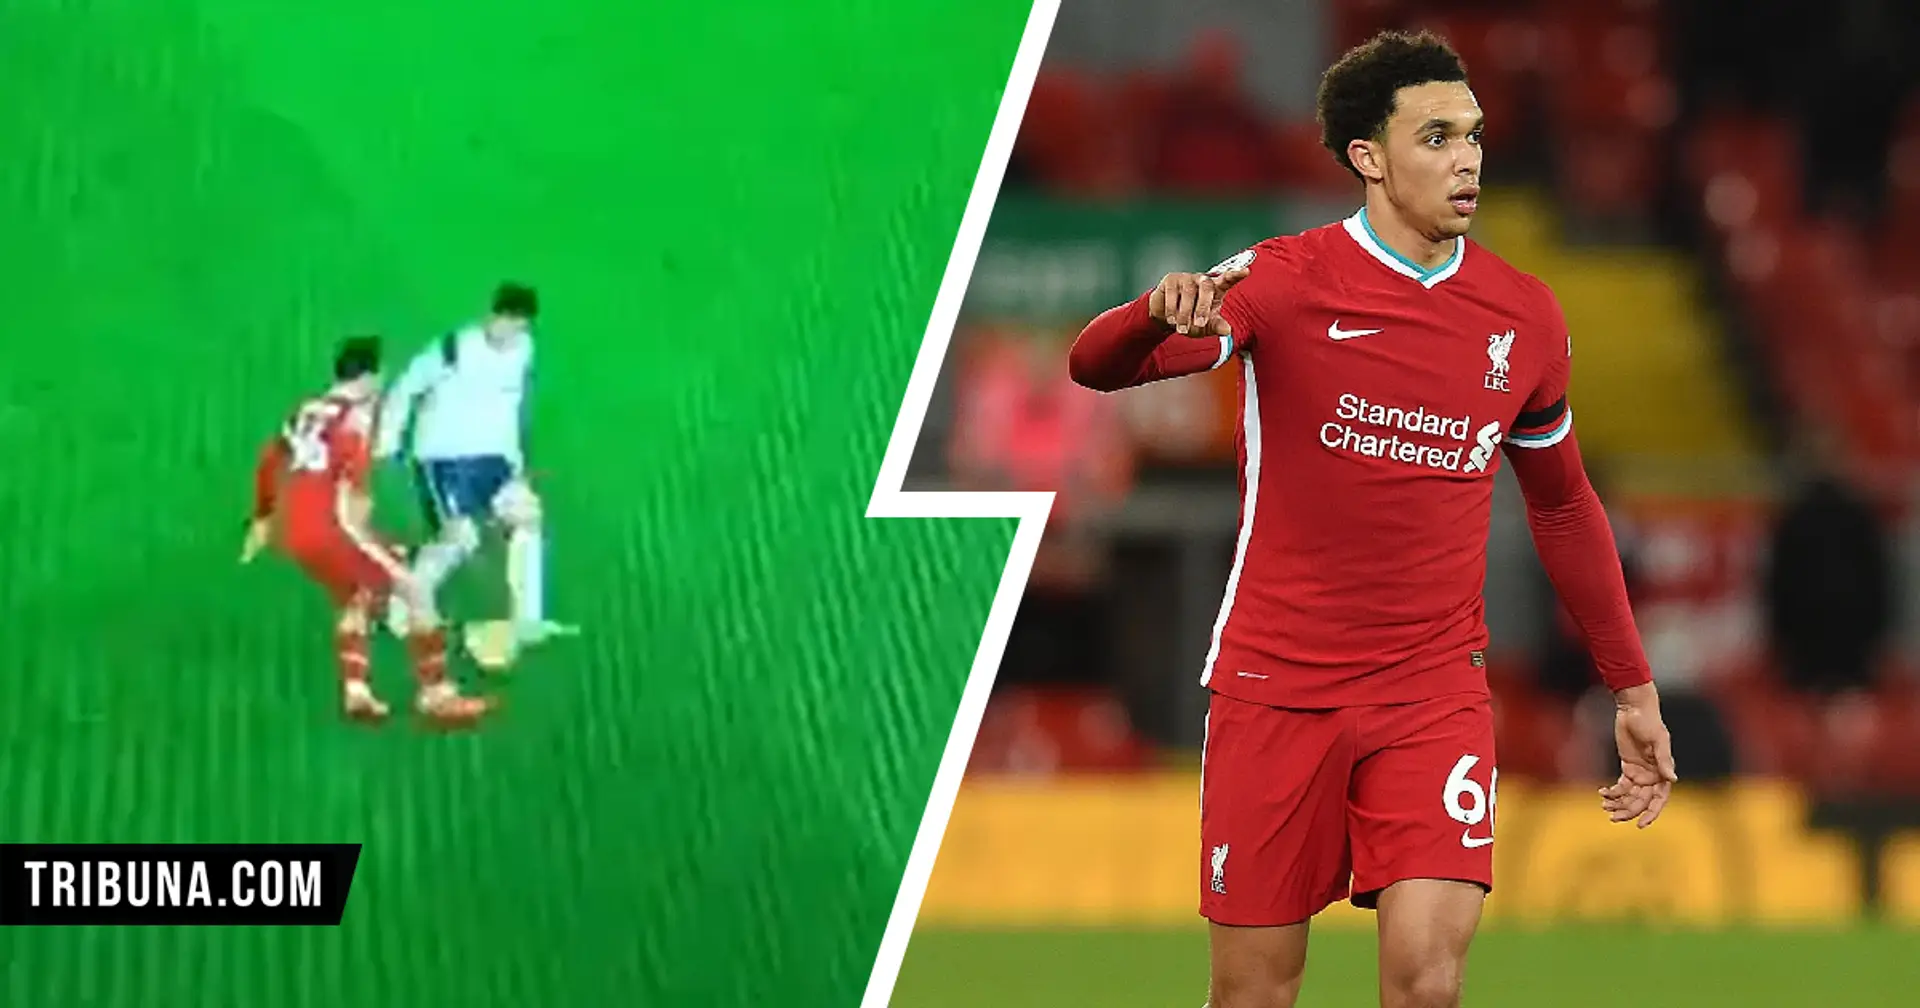 Trent leaves Son for dead with nasty nutmeg in Spurs clash